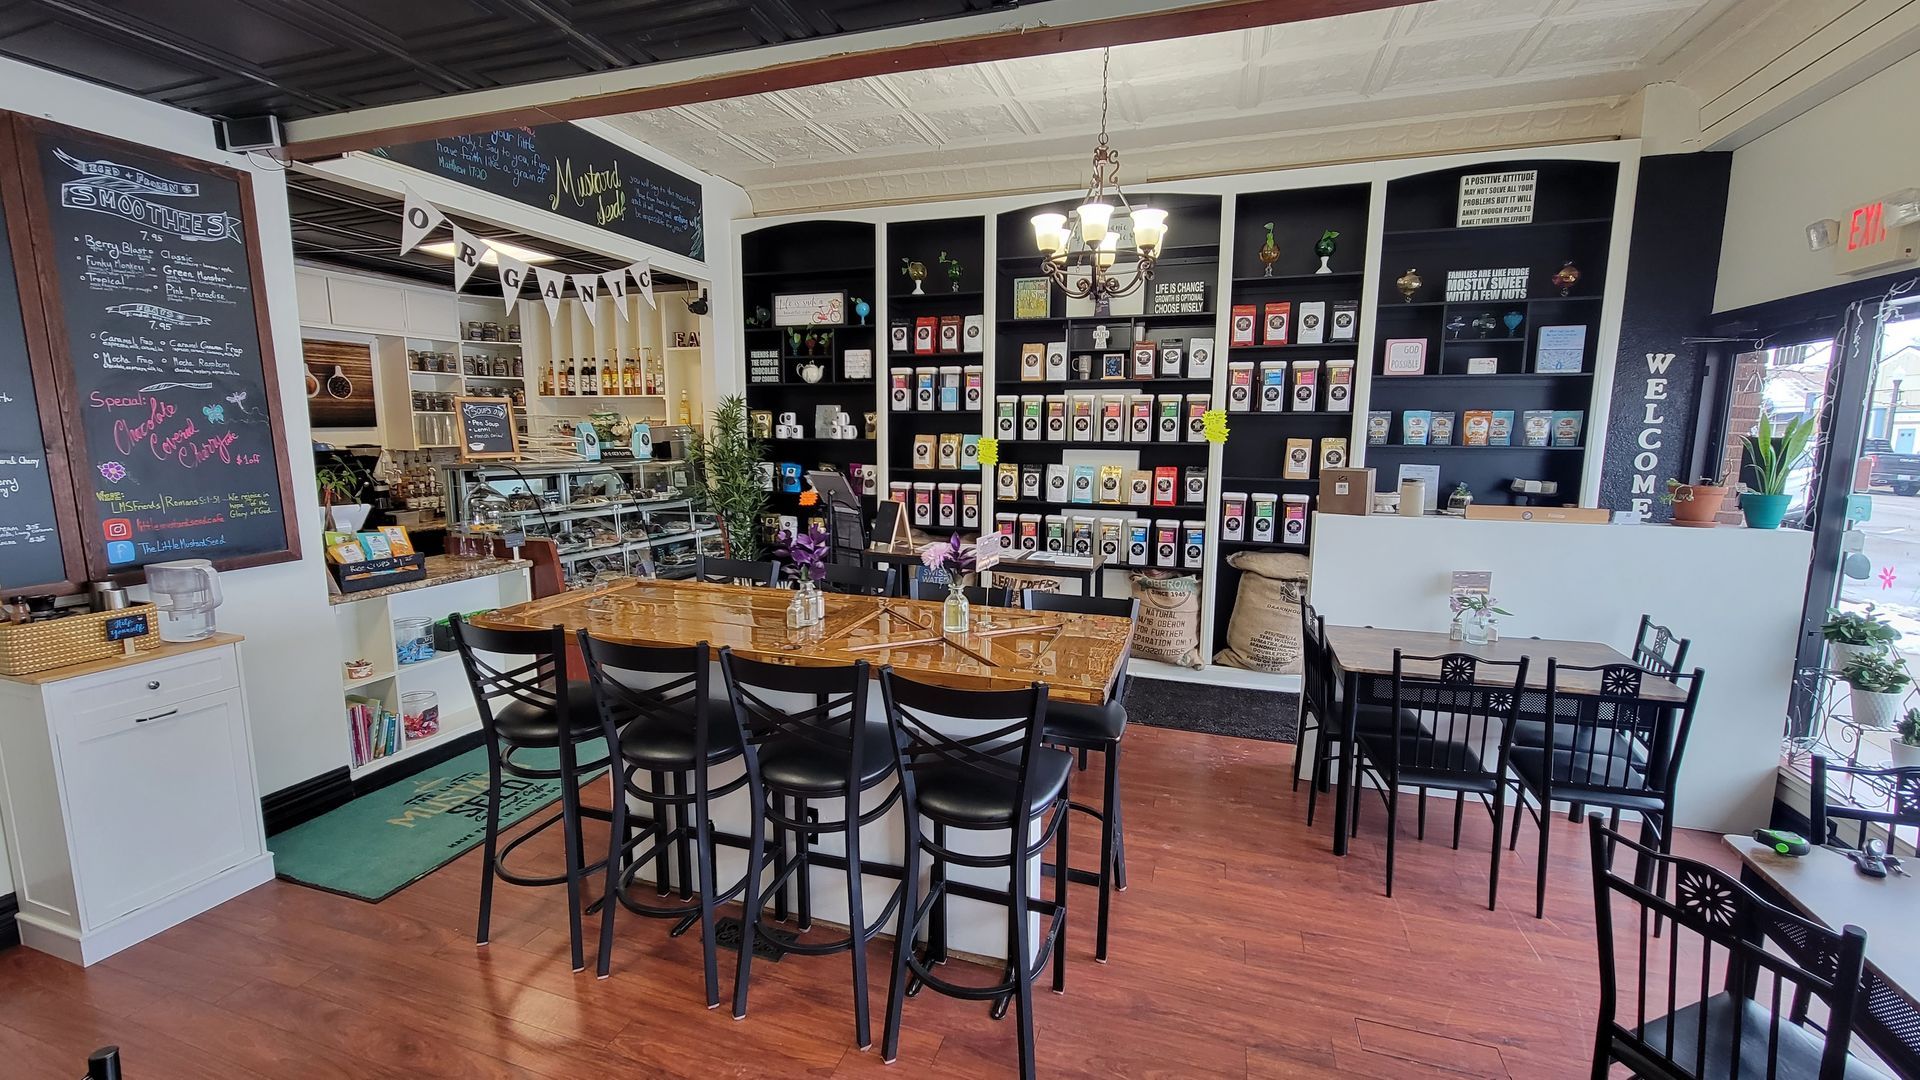 Inside view of The Little Mustard Seed cafe and Coffee shoppe in New Baltimore, MI